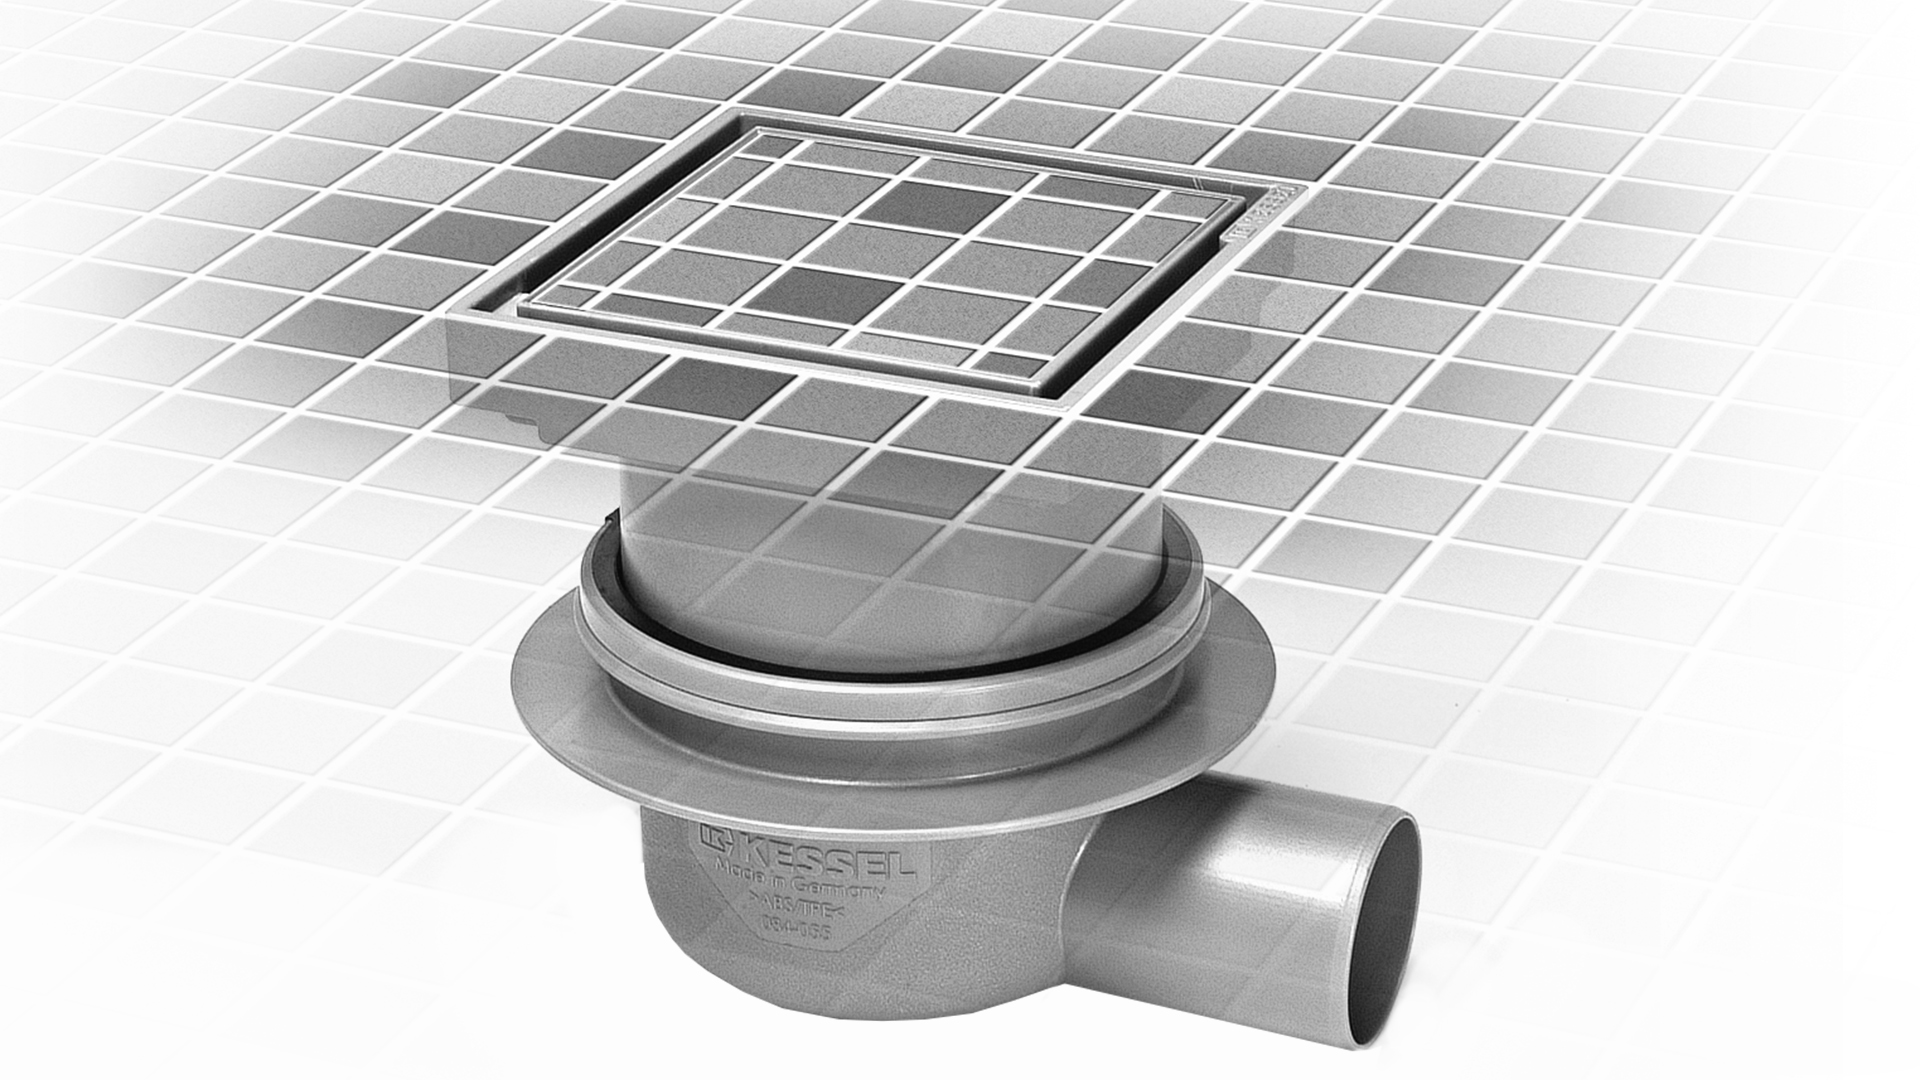 The bathroom drain becomes virtually invisible with the tileable cover